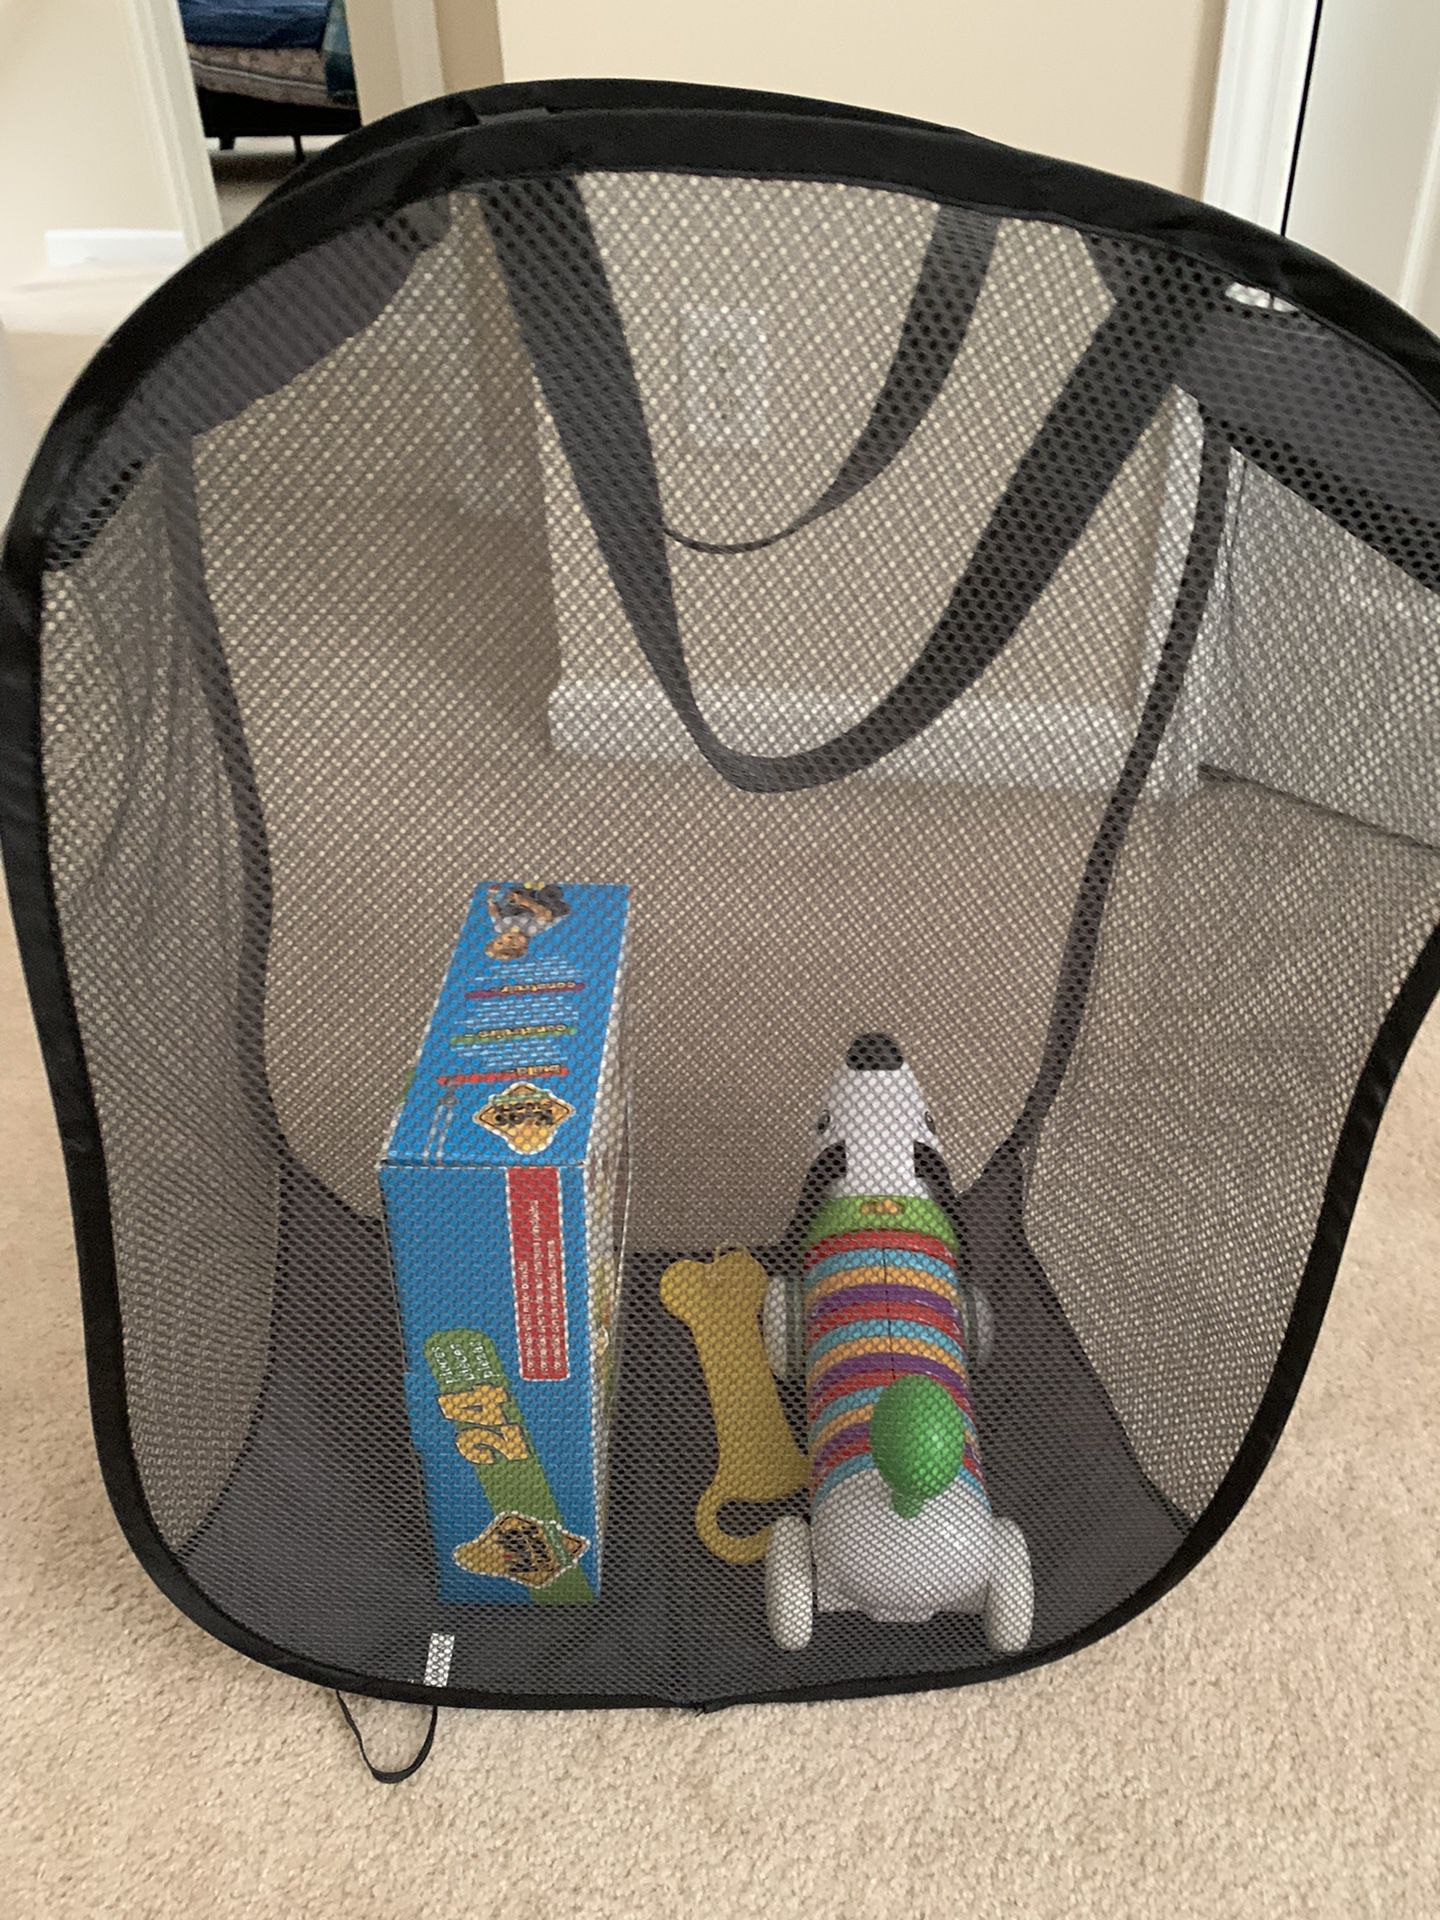  Baby Cloth Holder (basket) With 2 Toys